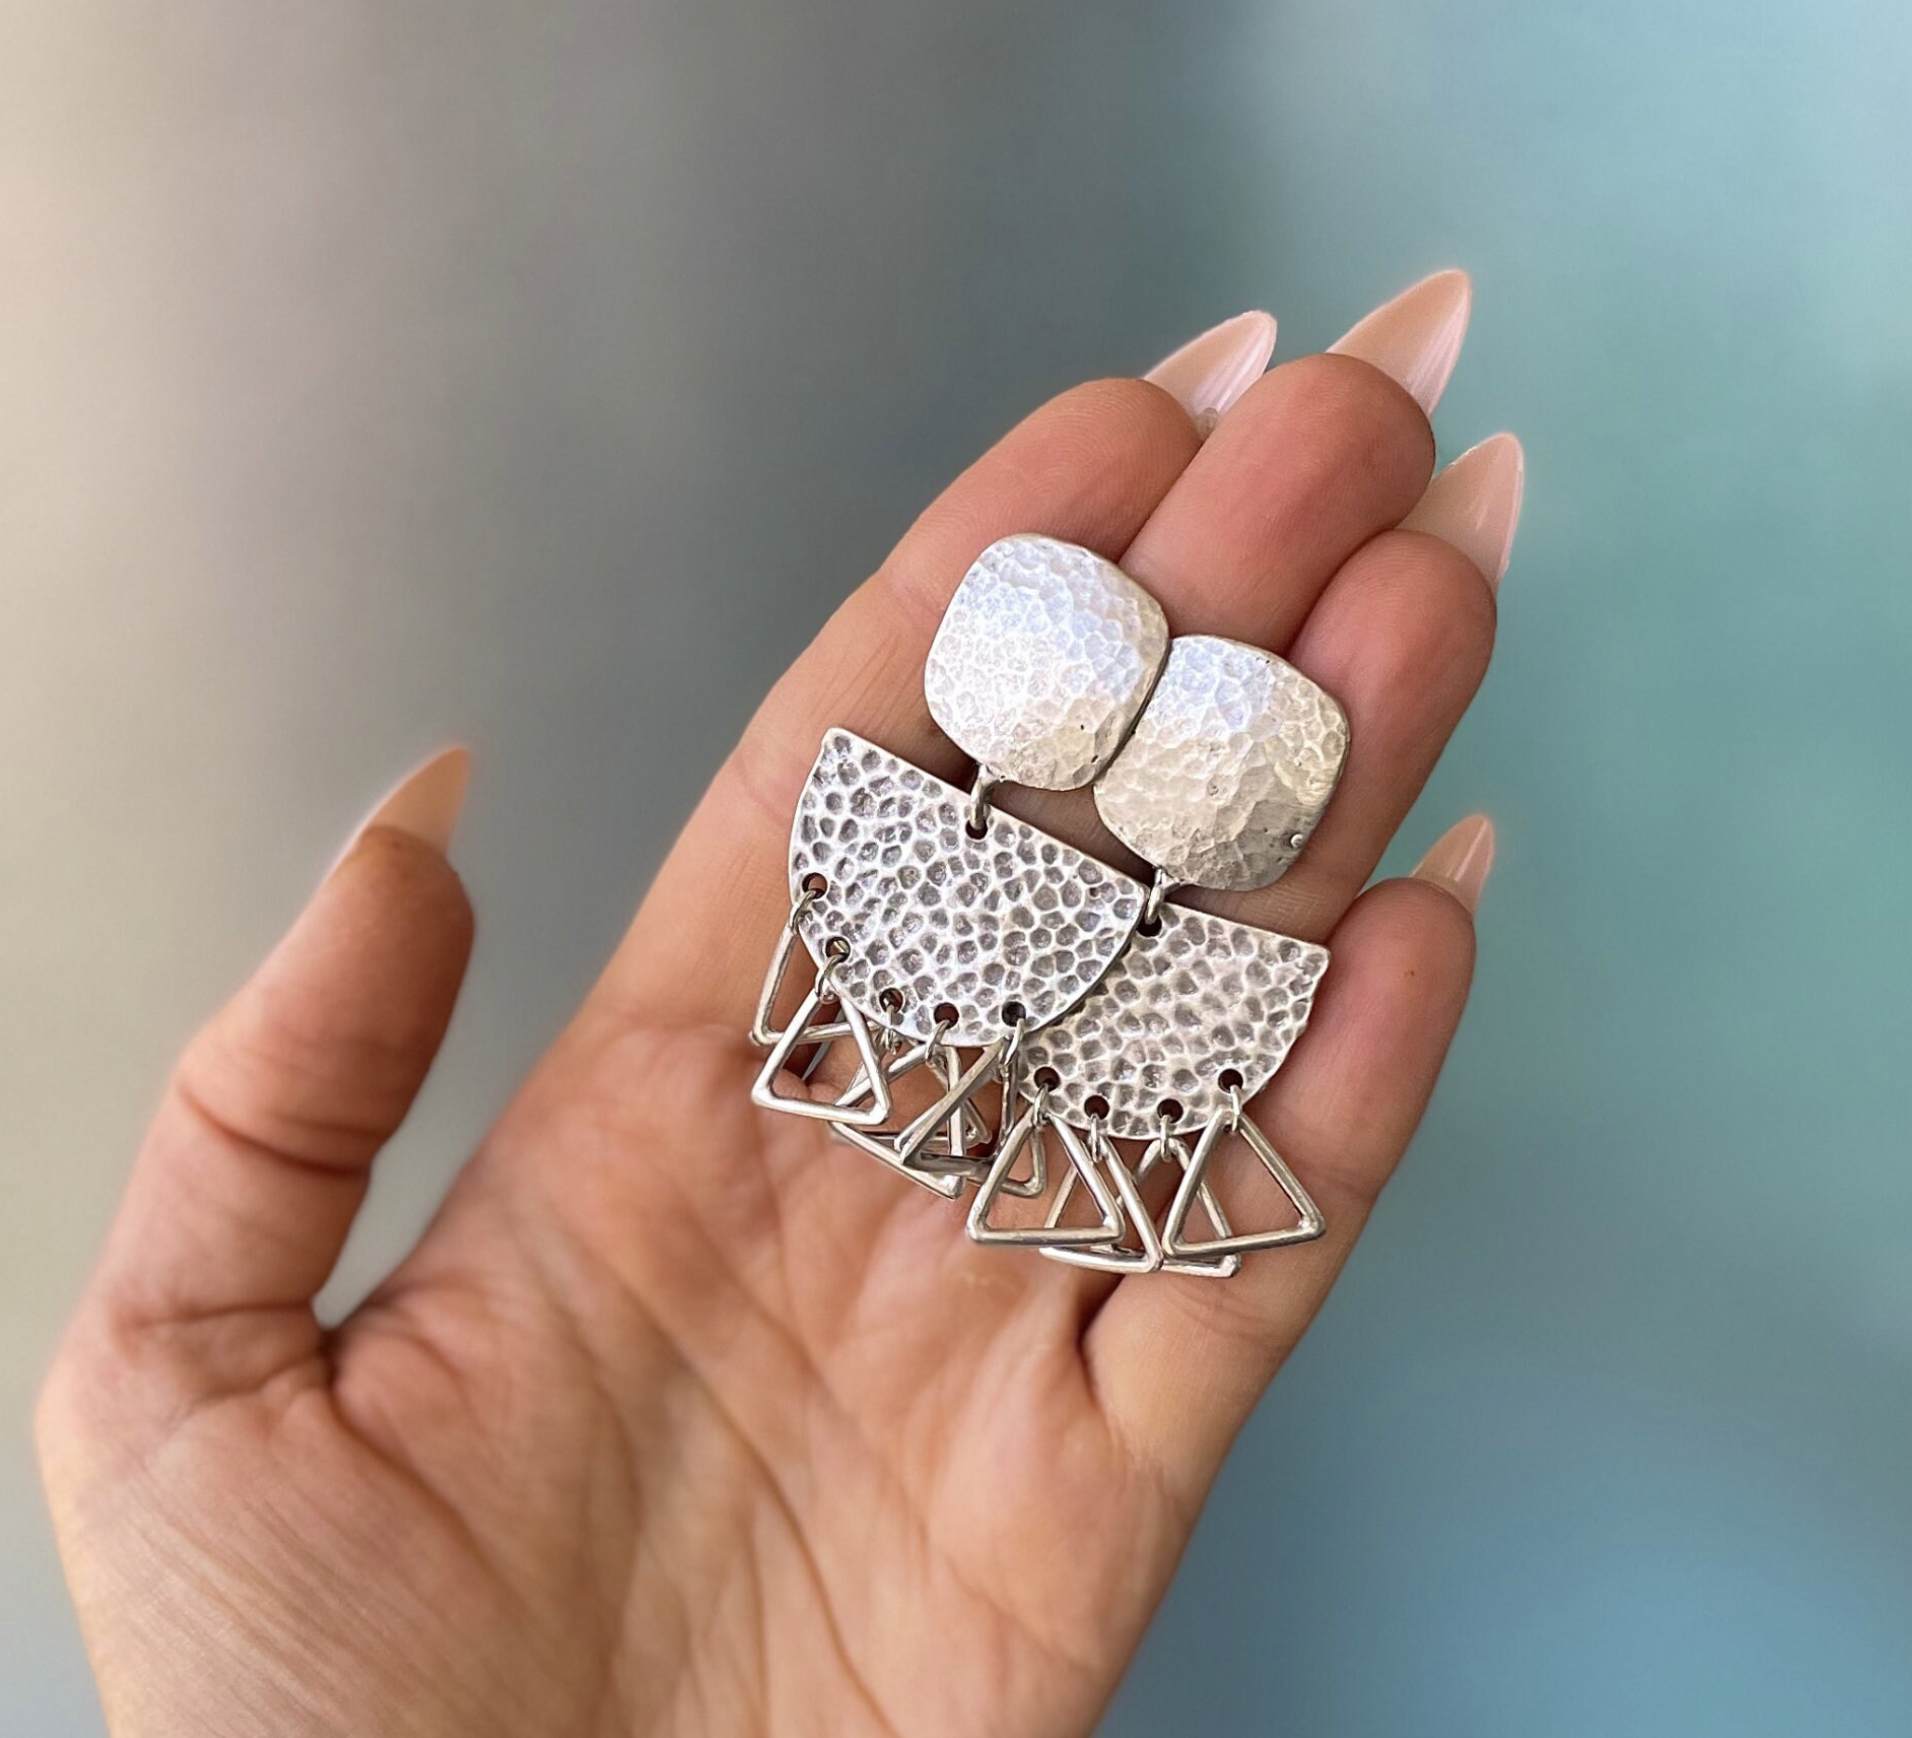 Solely Silver: An Ode to the Moon Silver Jewelry